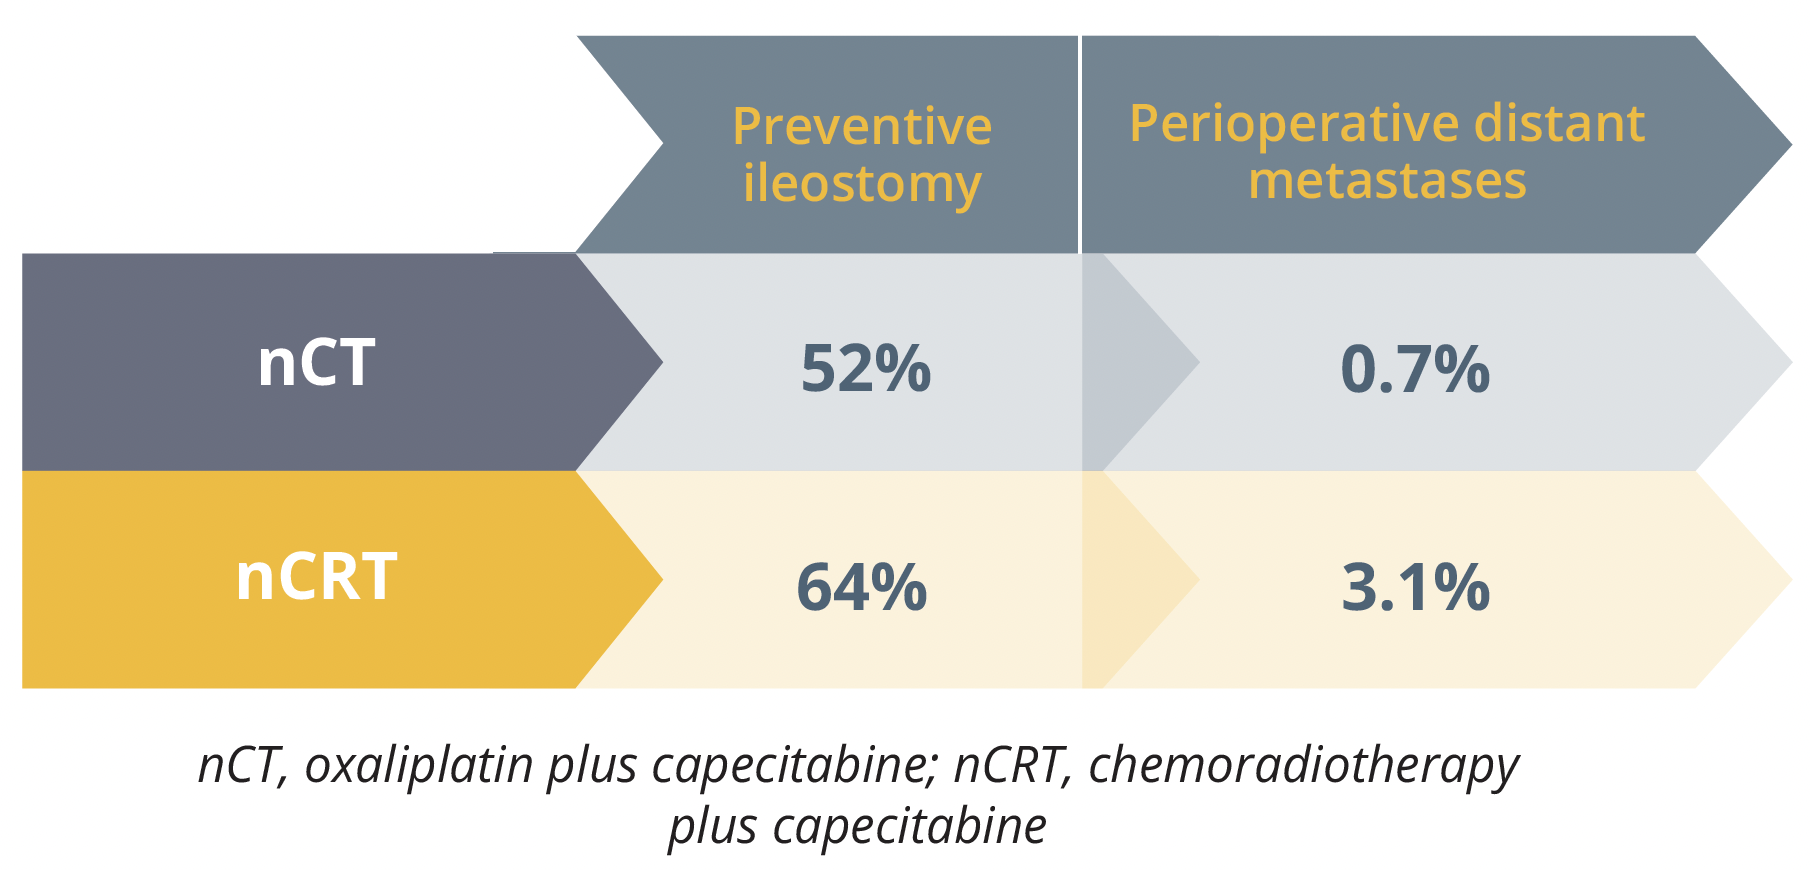 Reduction in perioperative metastases and preventive Ileostomies with oxaliplatin and capecitabine in patients with advanced rectal cancer